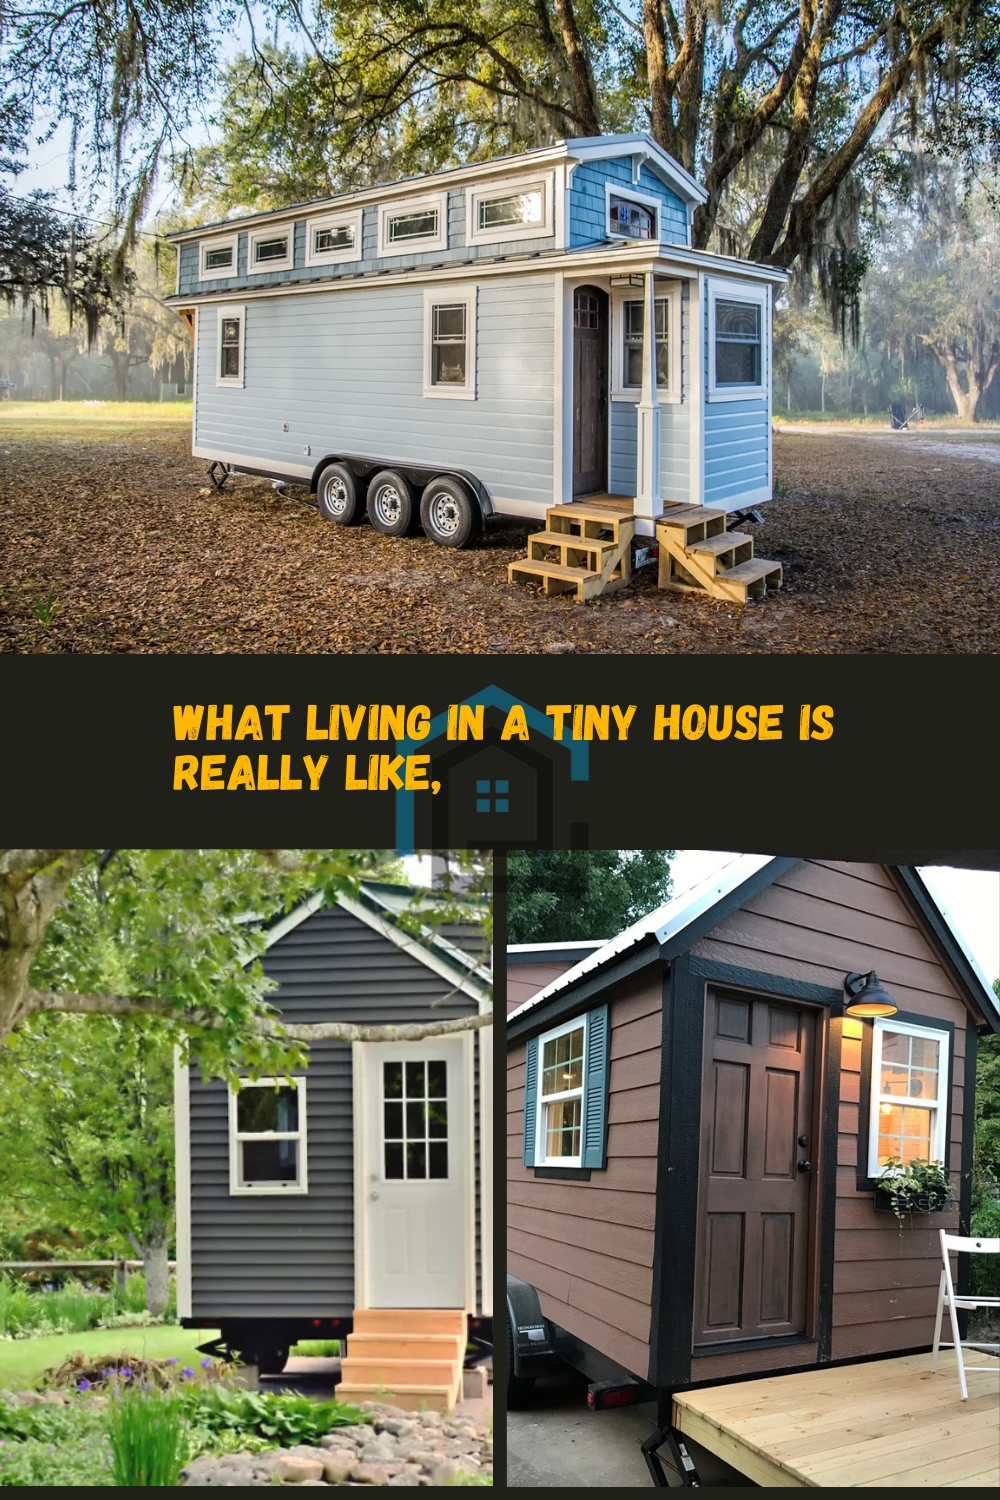 Here’s what living in a tiny house is really like, according to people who traded their homes for minimalism. pin